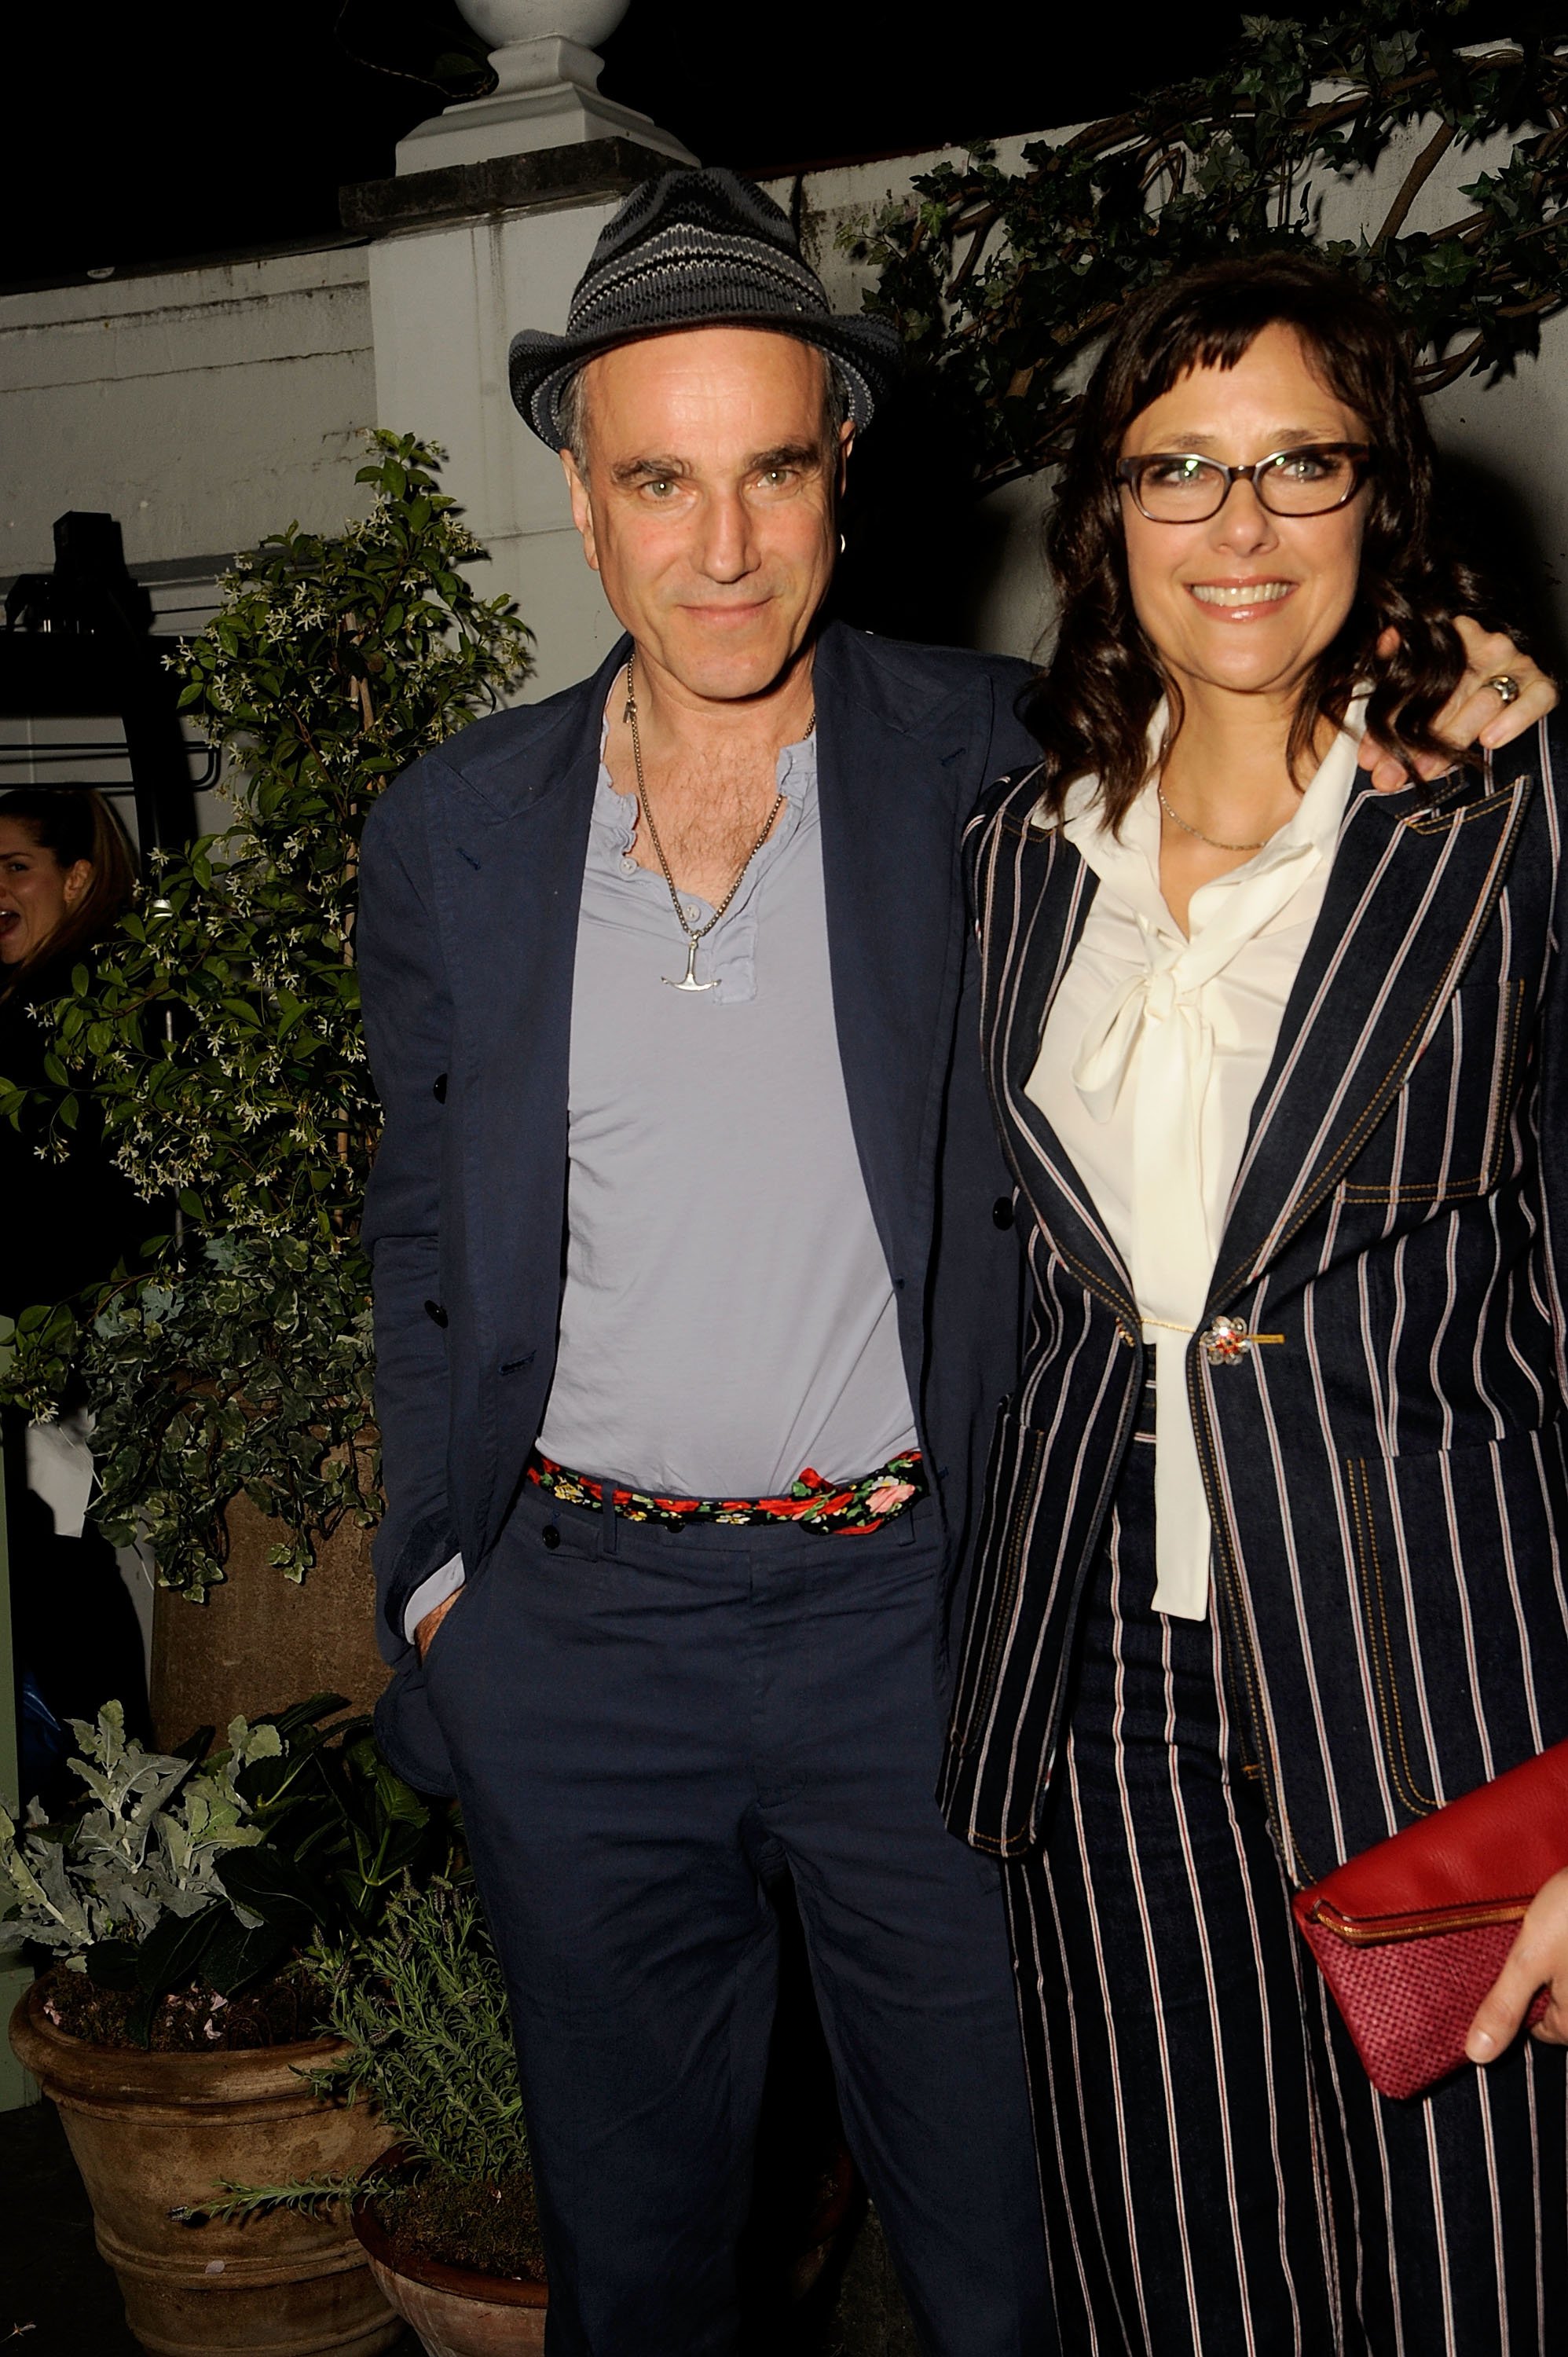  Daniel Day Lewis and Rebecca at a screening of Sony Pictures Classics' "Maggie's Plan" After Party on May 5, 2016, in New York City. | Source: Getty Images